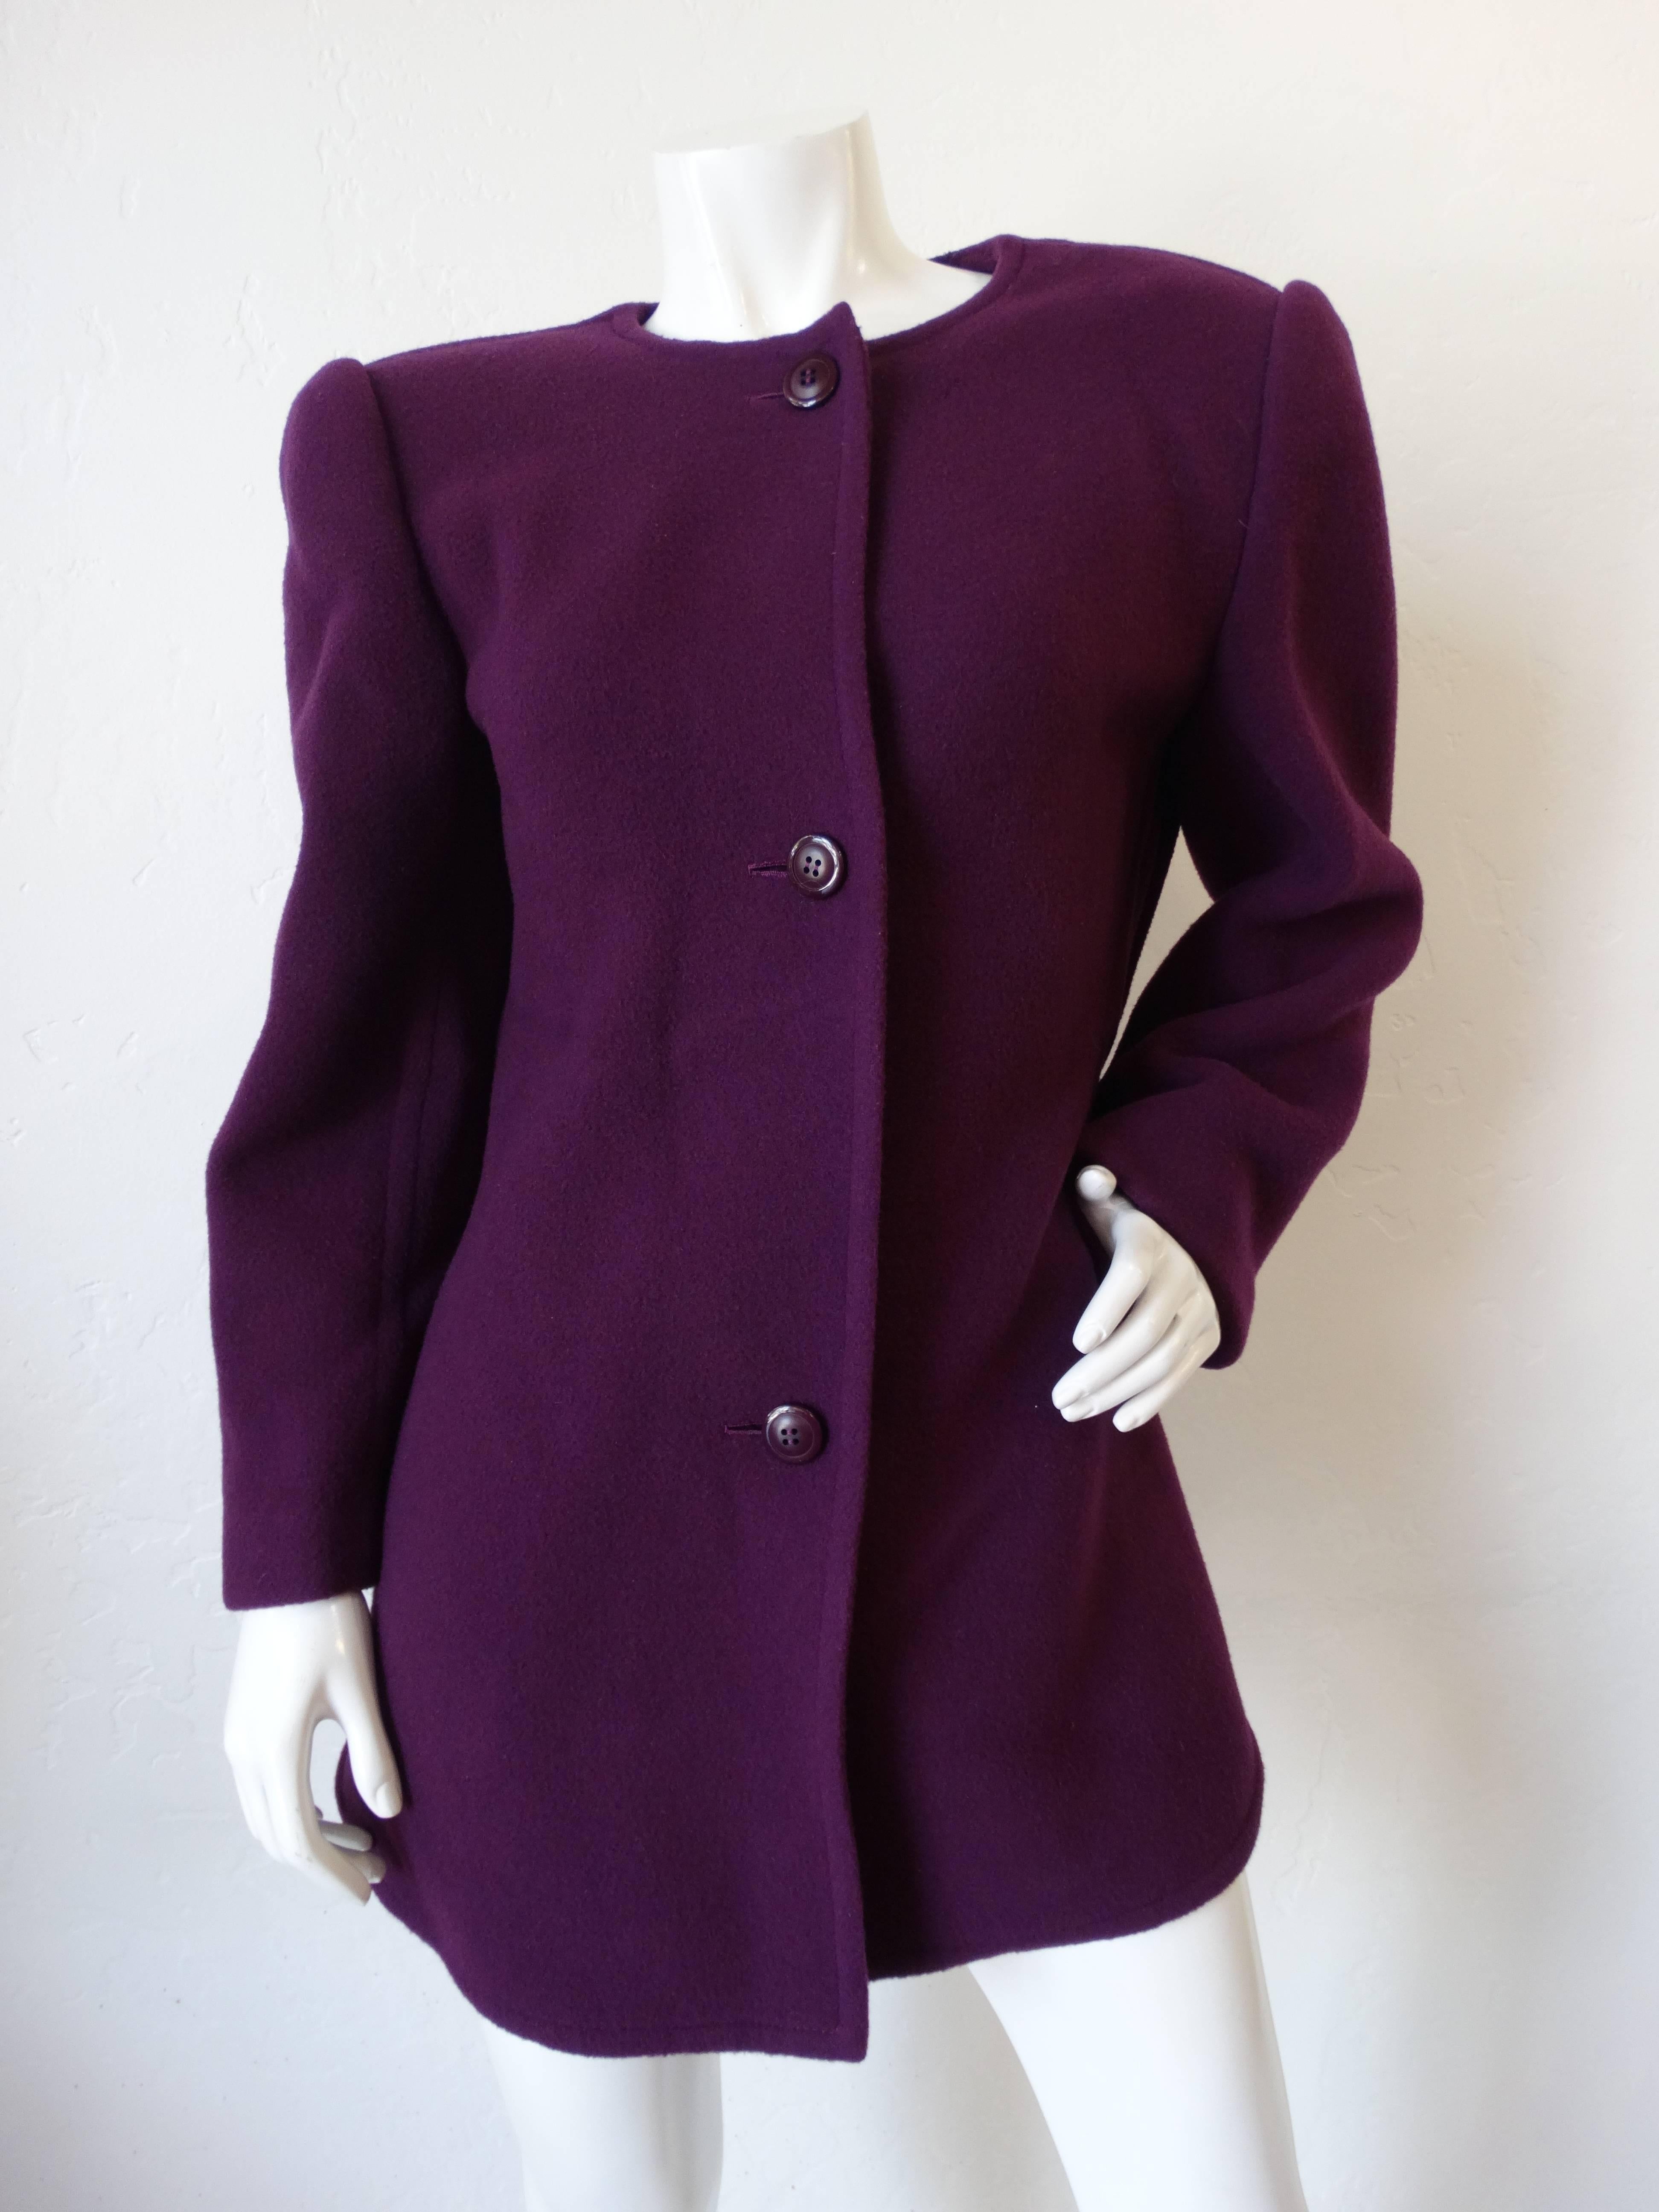 Channel the power dressing spirit of the 1980s with this strong shouldered jacket from prolific designer, James Galanos! Made of a soft wool blend in a brilliant eggplant purple color. Buttons up the front with matching buttons. Back of the jacket